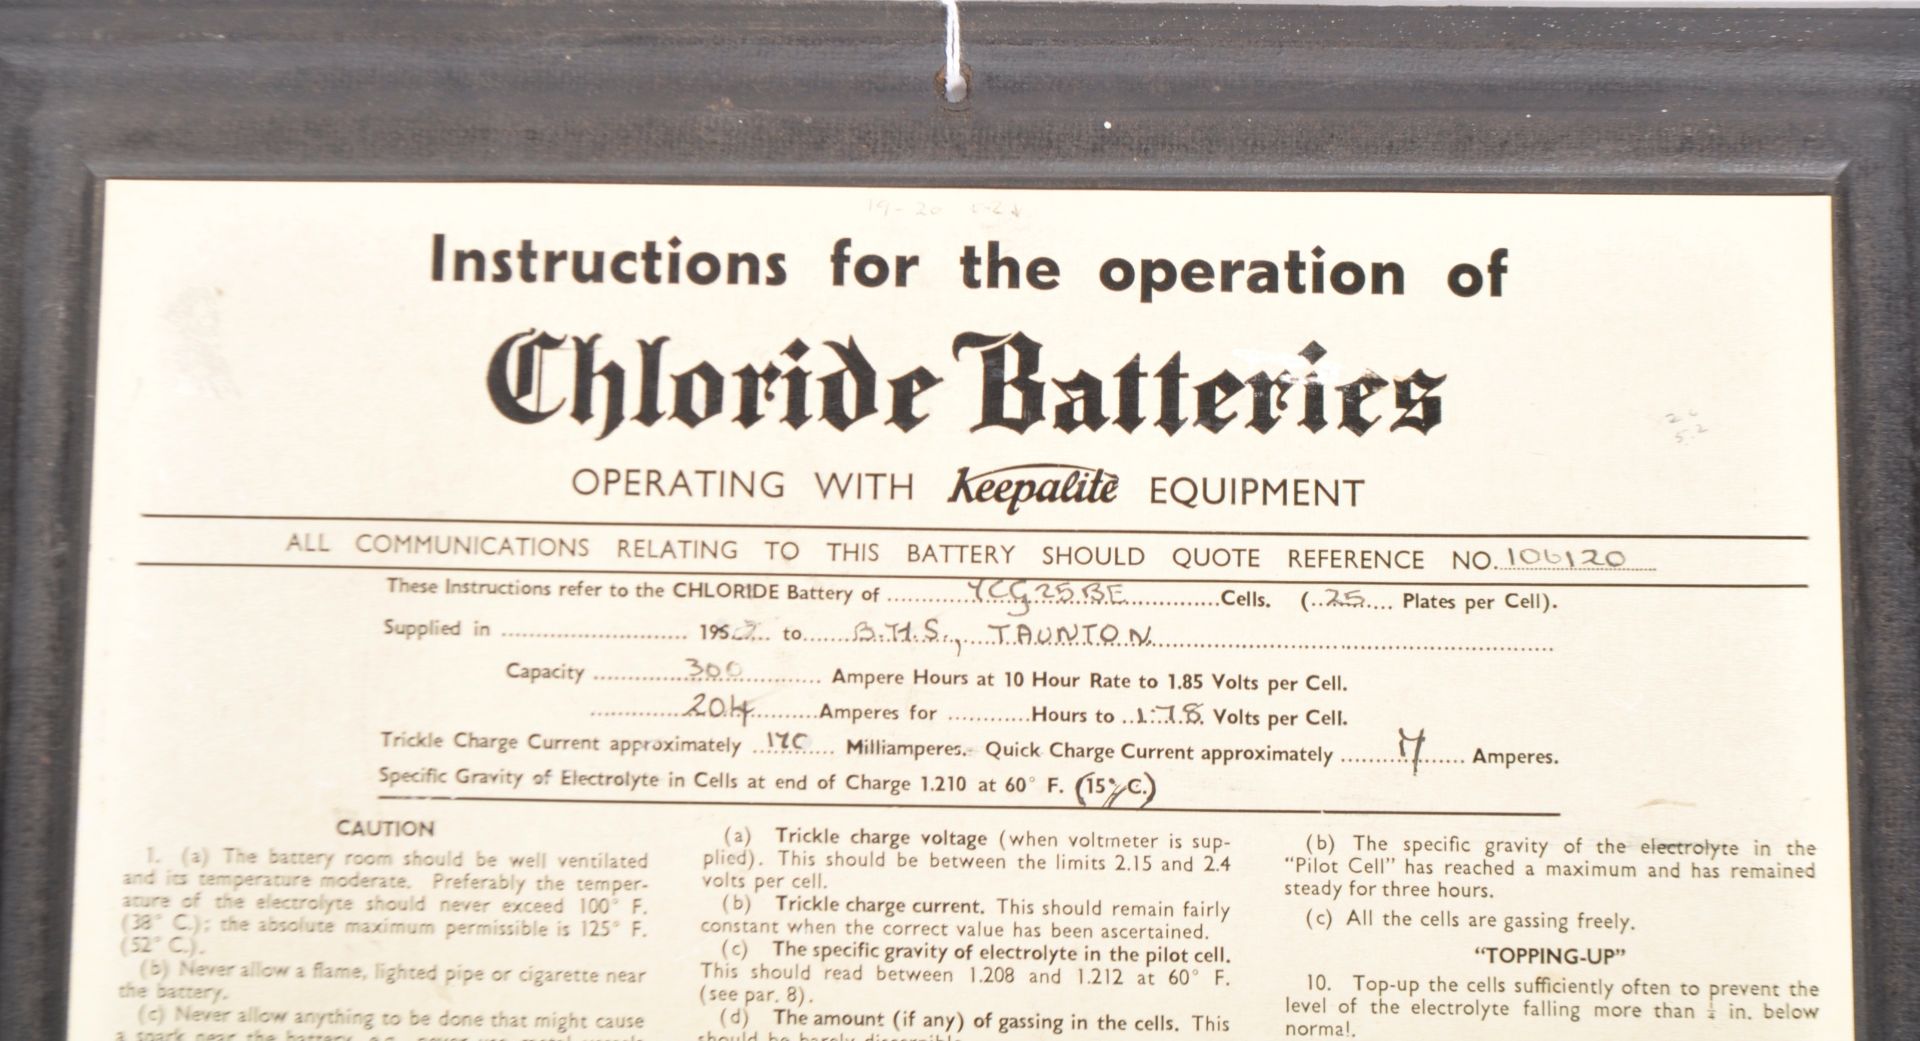 CHLORIDE BATTERIES - MID 20TH CENTURY CARDBOARD SIGN - Image 2 of 6